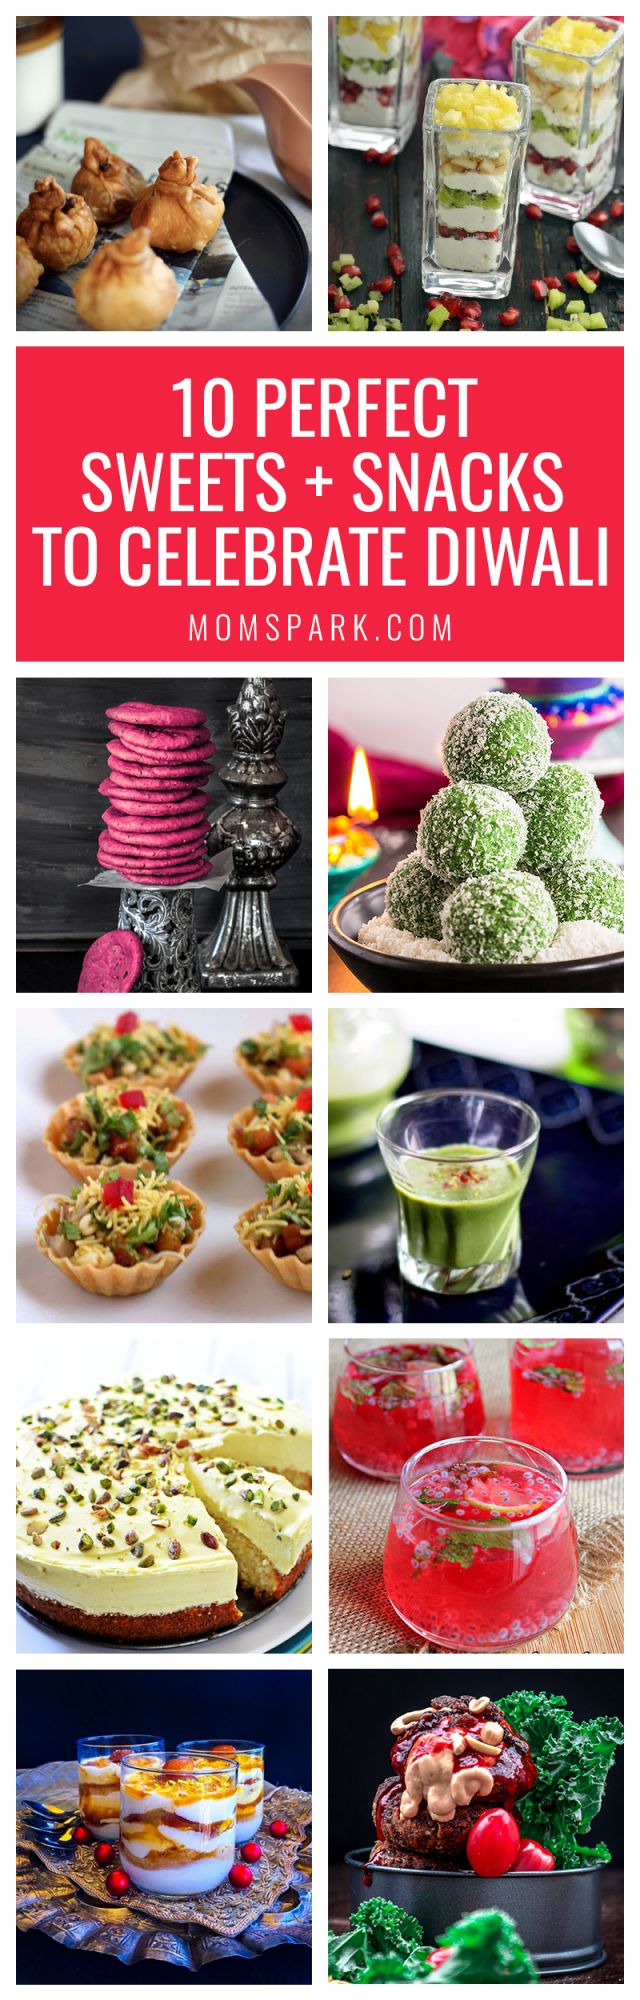 The Perfect Sweets and Snacks to Celebrate Diwali